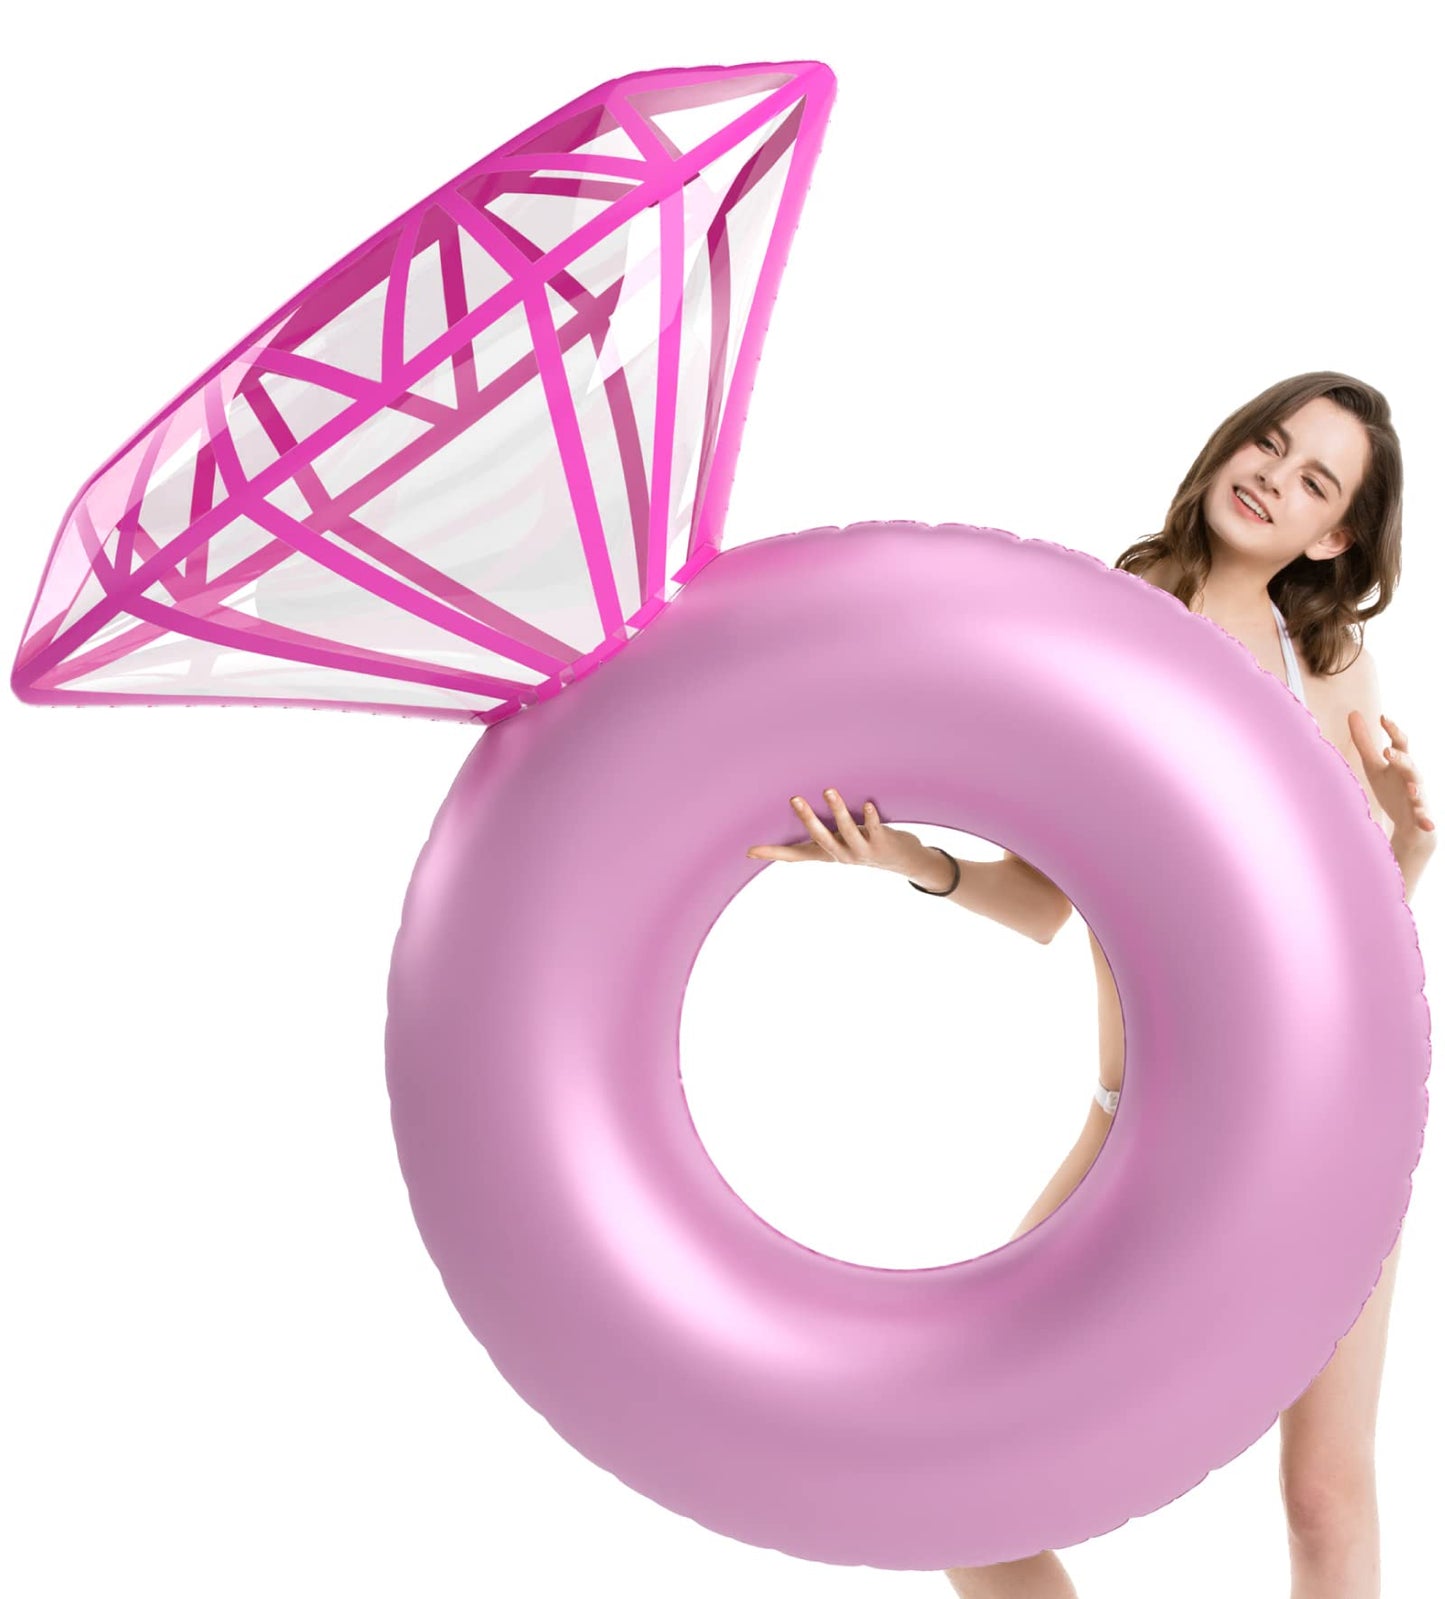 Jasonwell Inflatable Diamond Ring Pool Float - Engagement Ring Bachelorette Party Float Stagette Decorations Swimming Tube Floaty Outdoor Water Lounge for Adults & Kids Pink